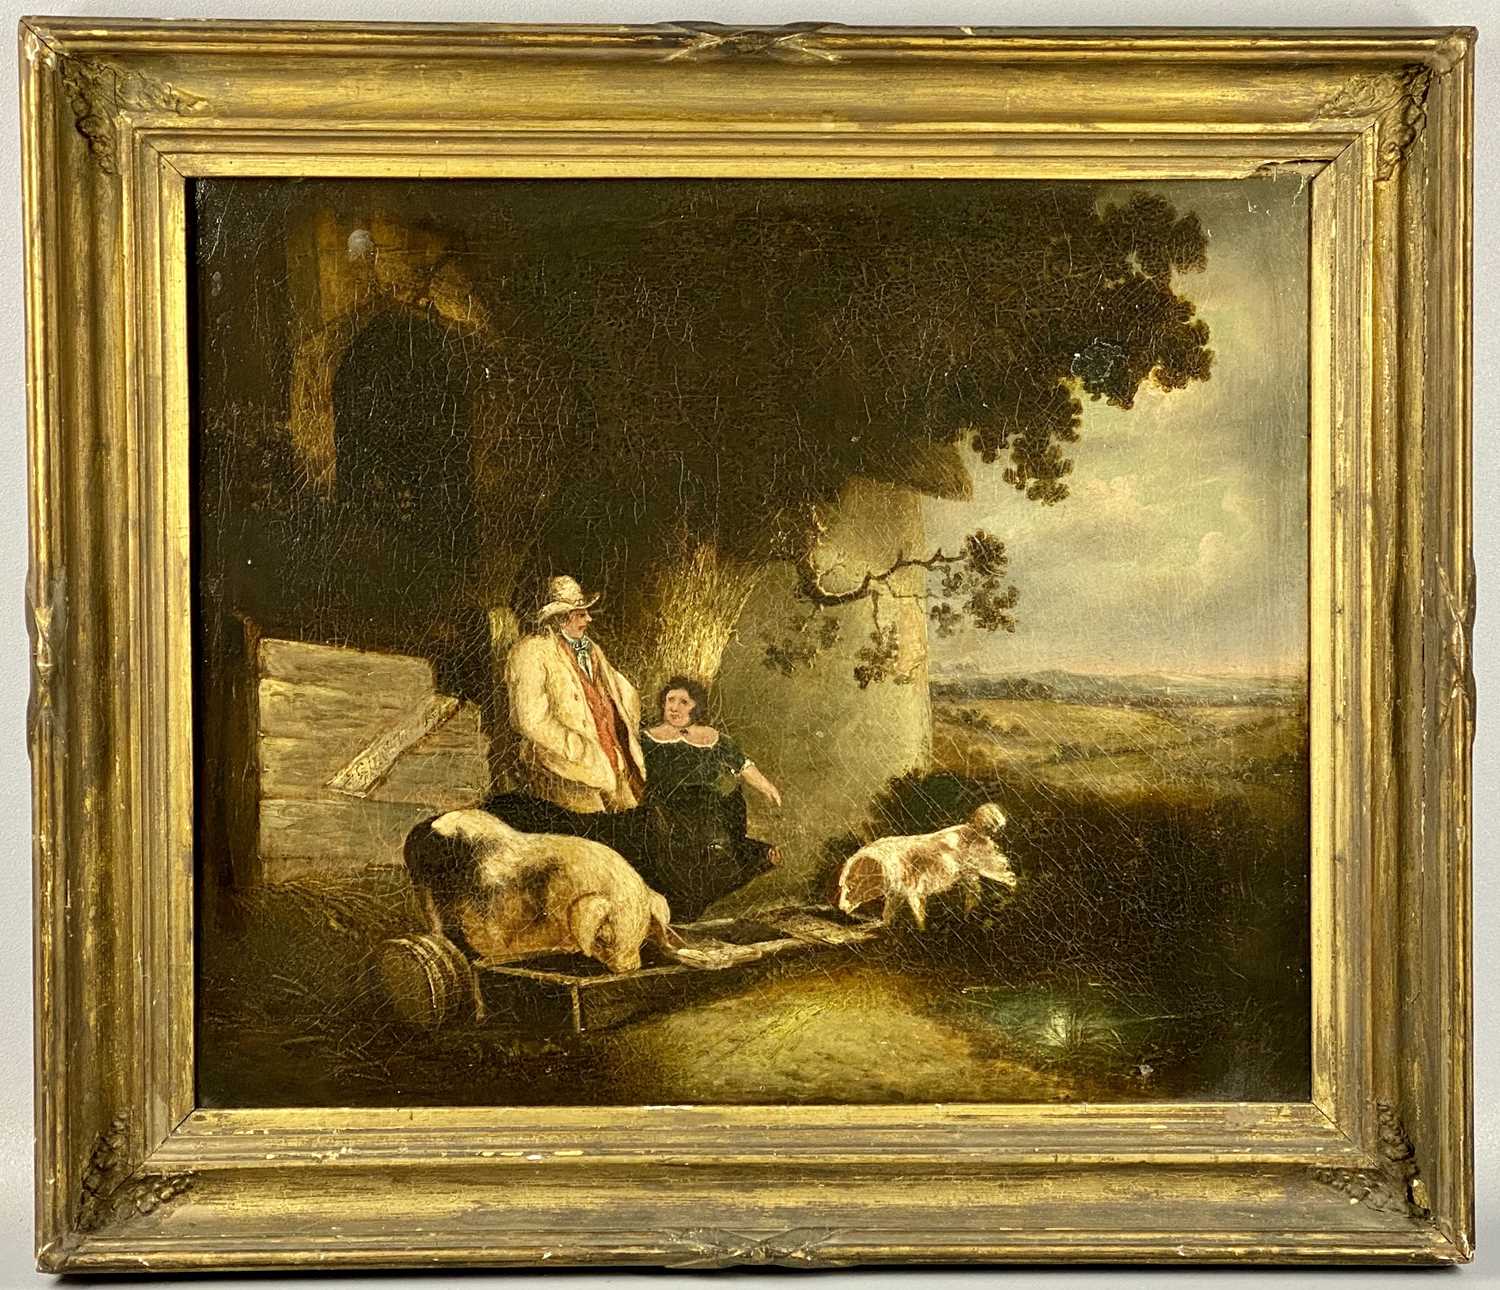 19TH CENTURY BRITISH PRIMITIVE oil on canvas - farmer and wife with two pigs feeding from trough and - Image 2 of 3